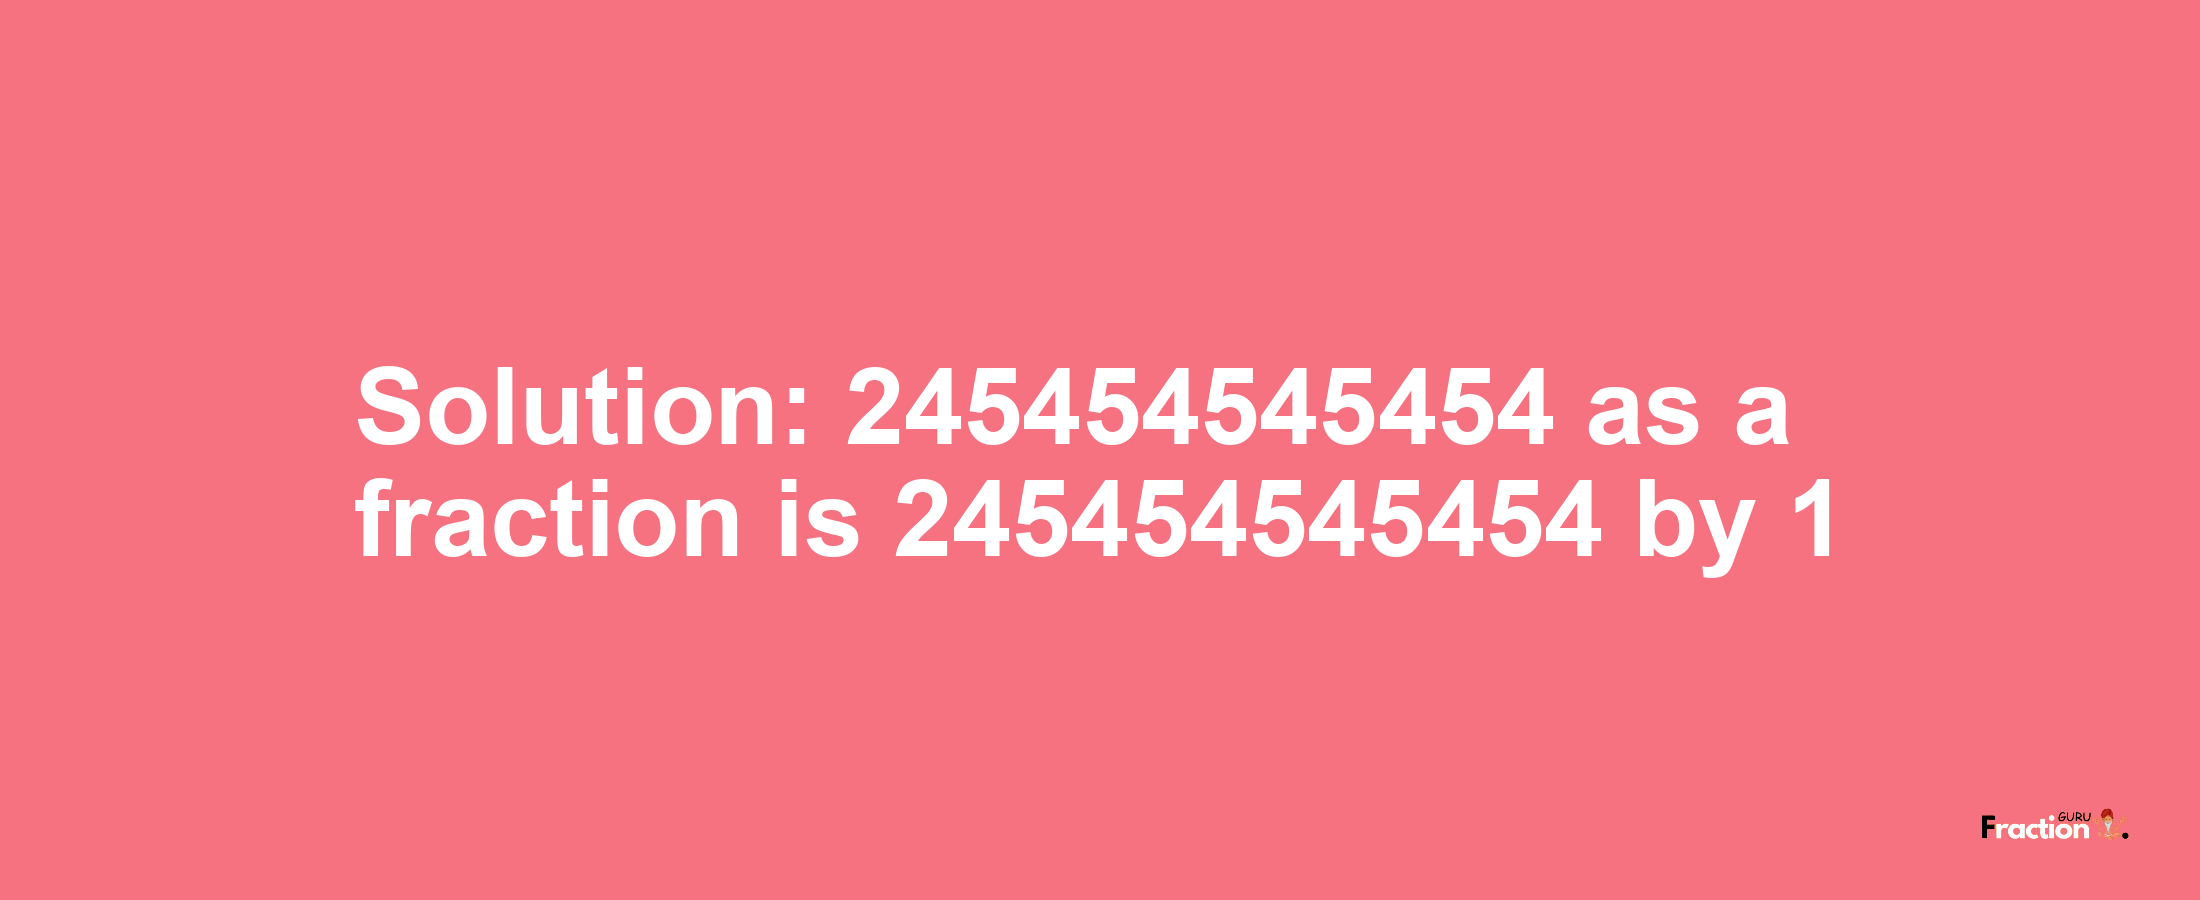 Solution:245454545454 as a fraction is 245454545454/1